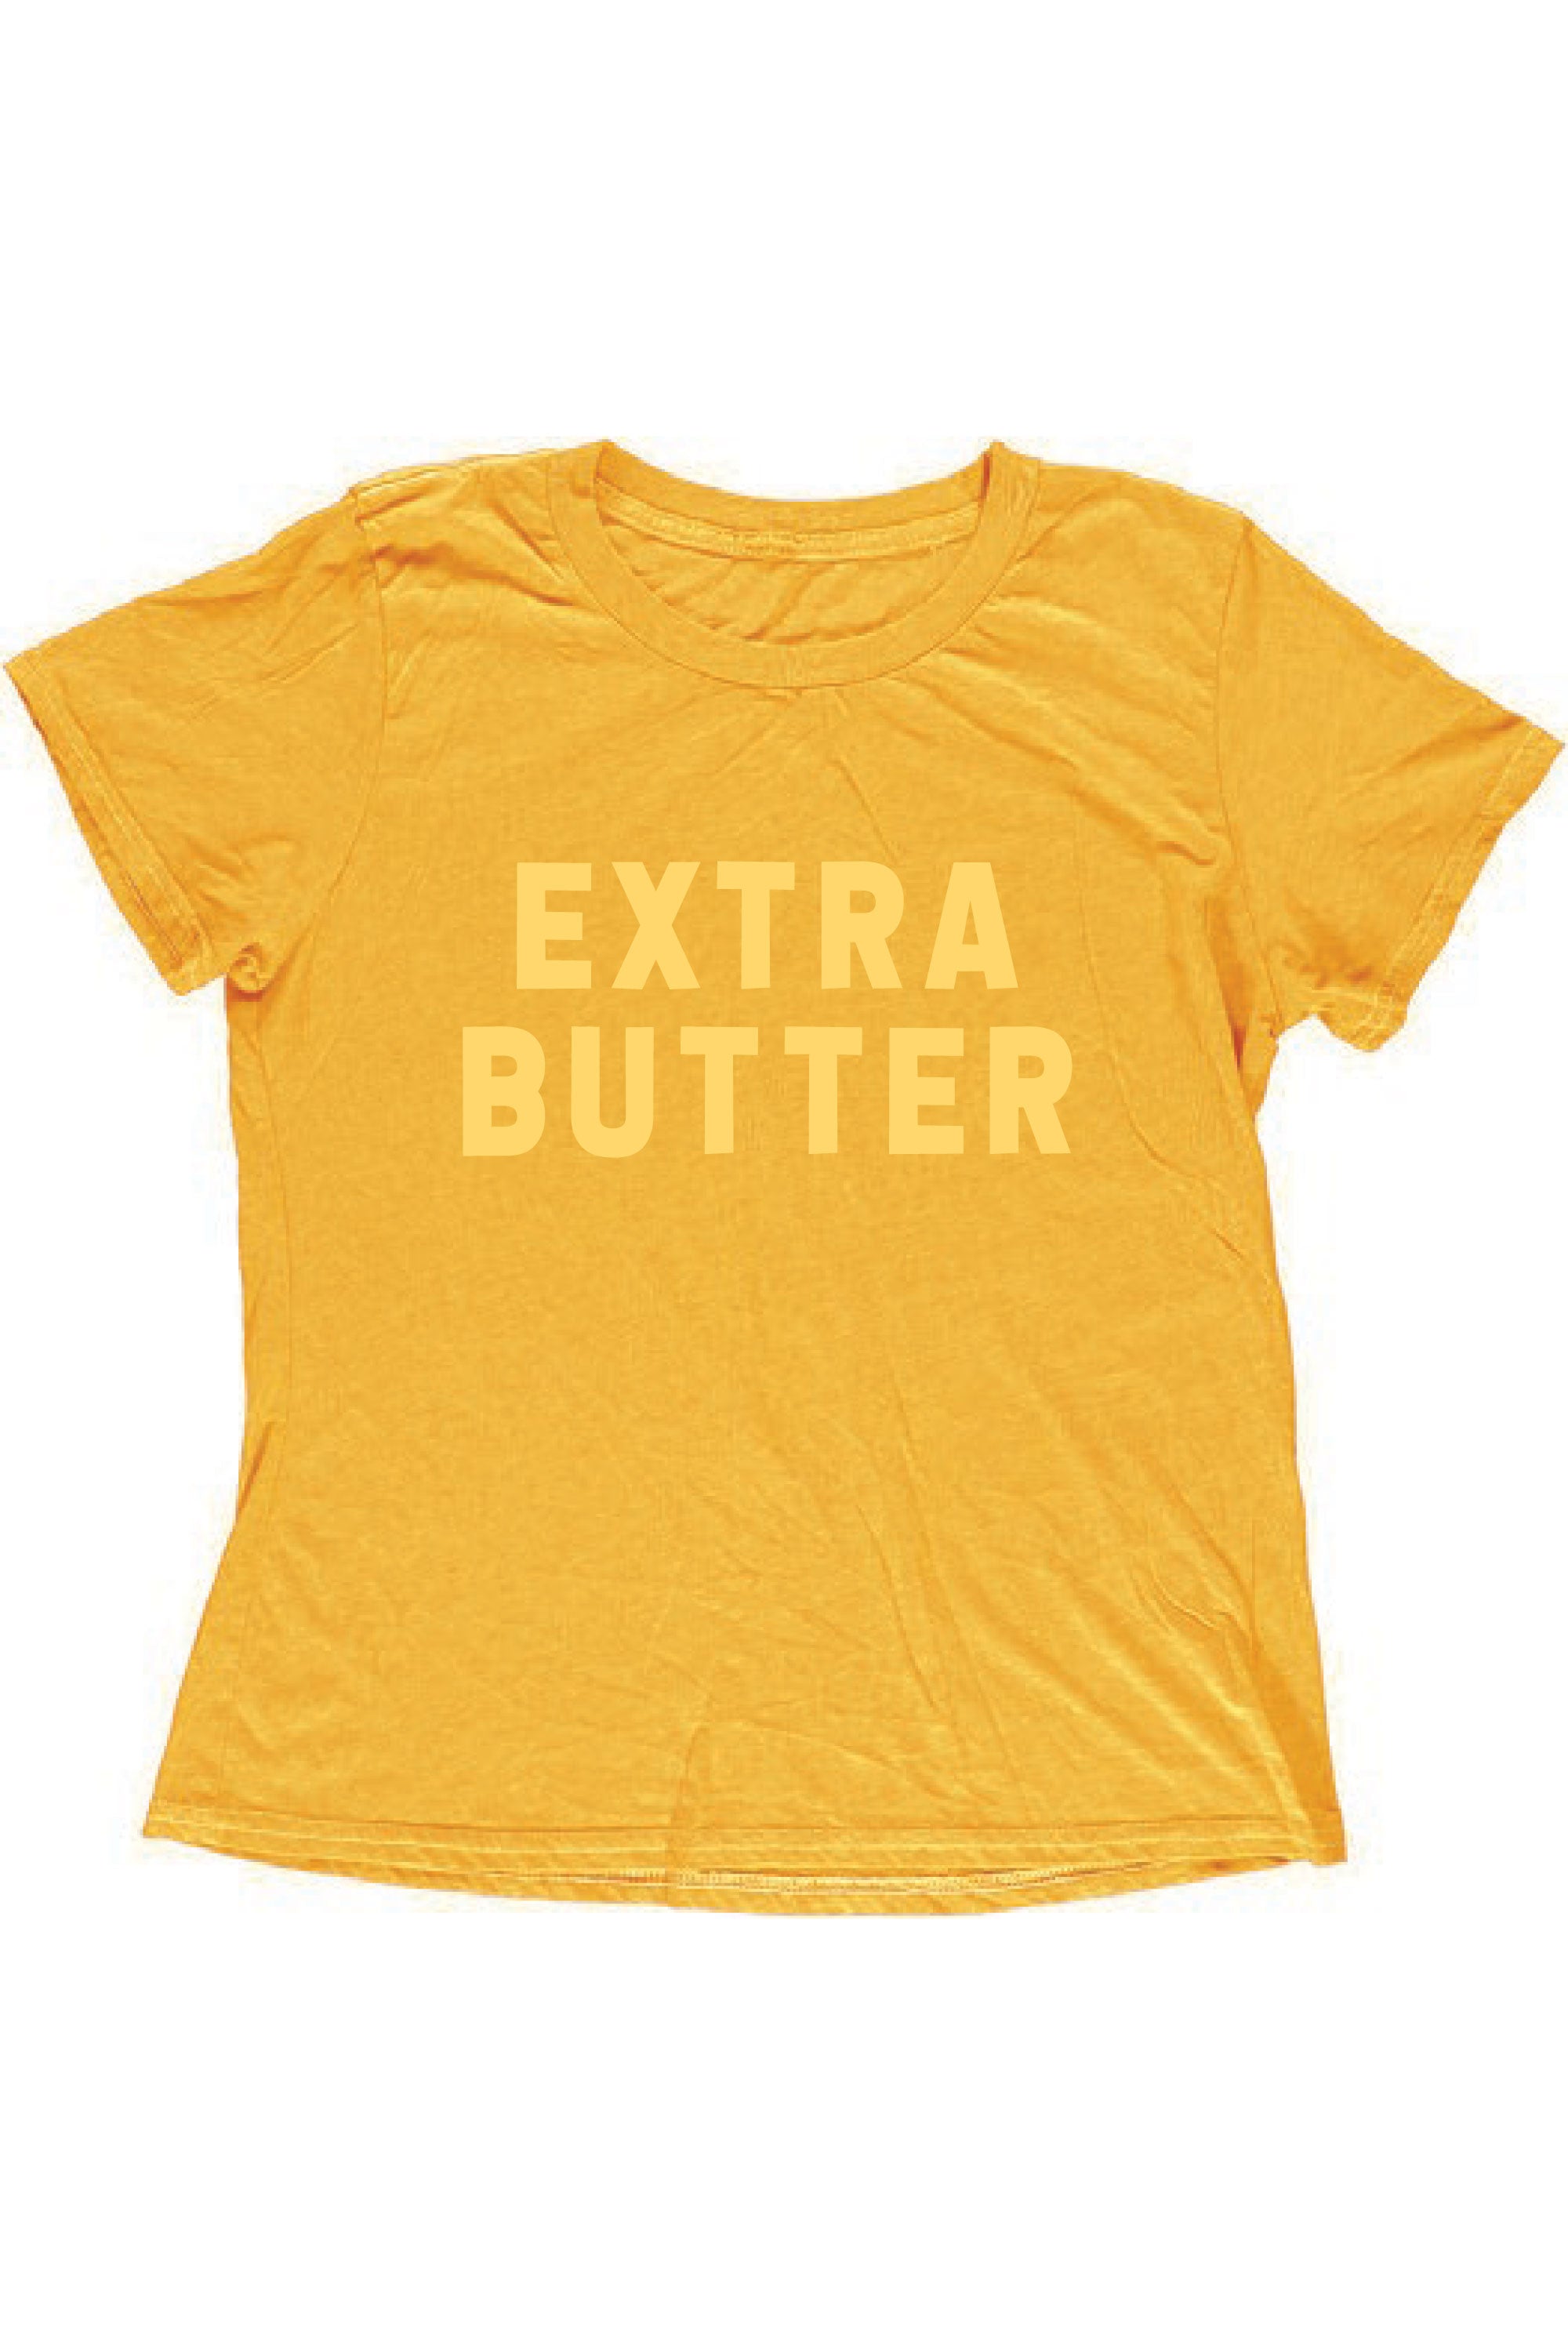 EXTRA BUTTER YOUTH SIZE LOOSE TEE